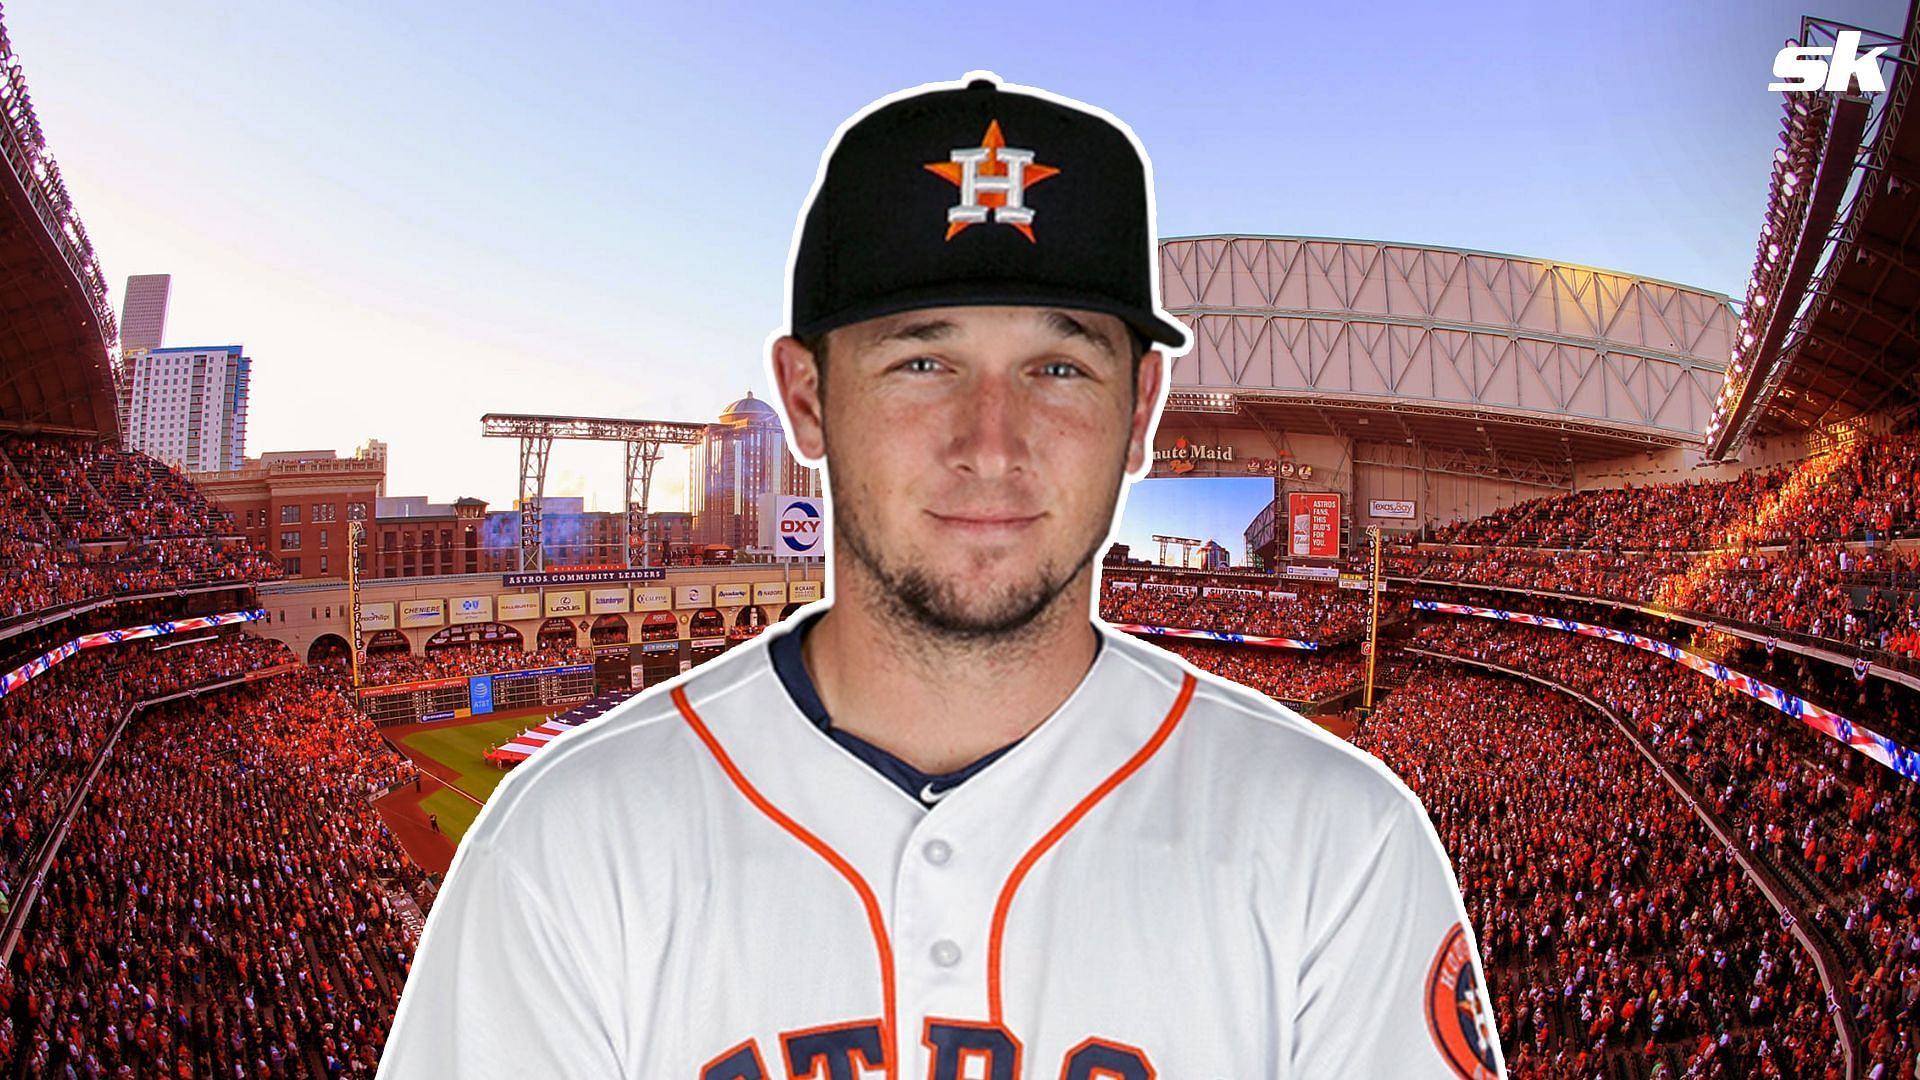 Alex Bregman trade rumors are heating up following word that he could be a candidate to be moved by the Houston Astros